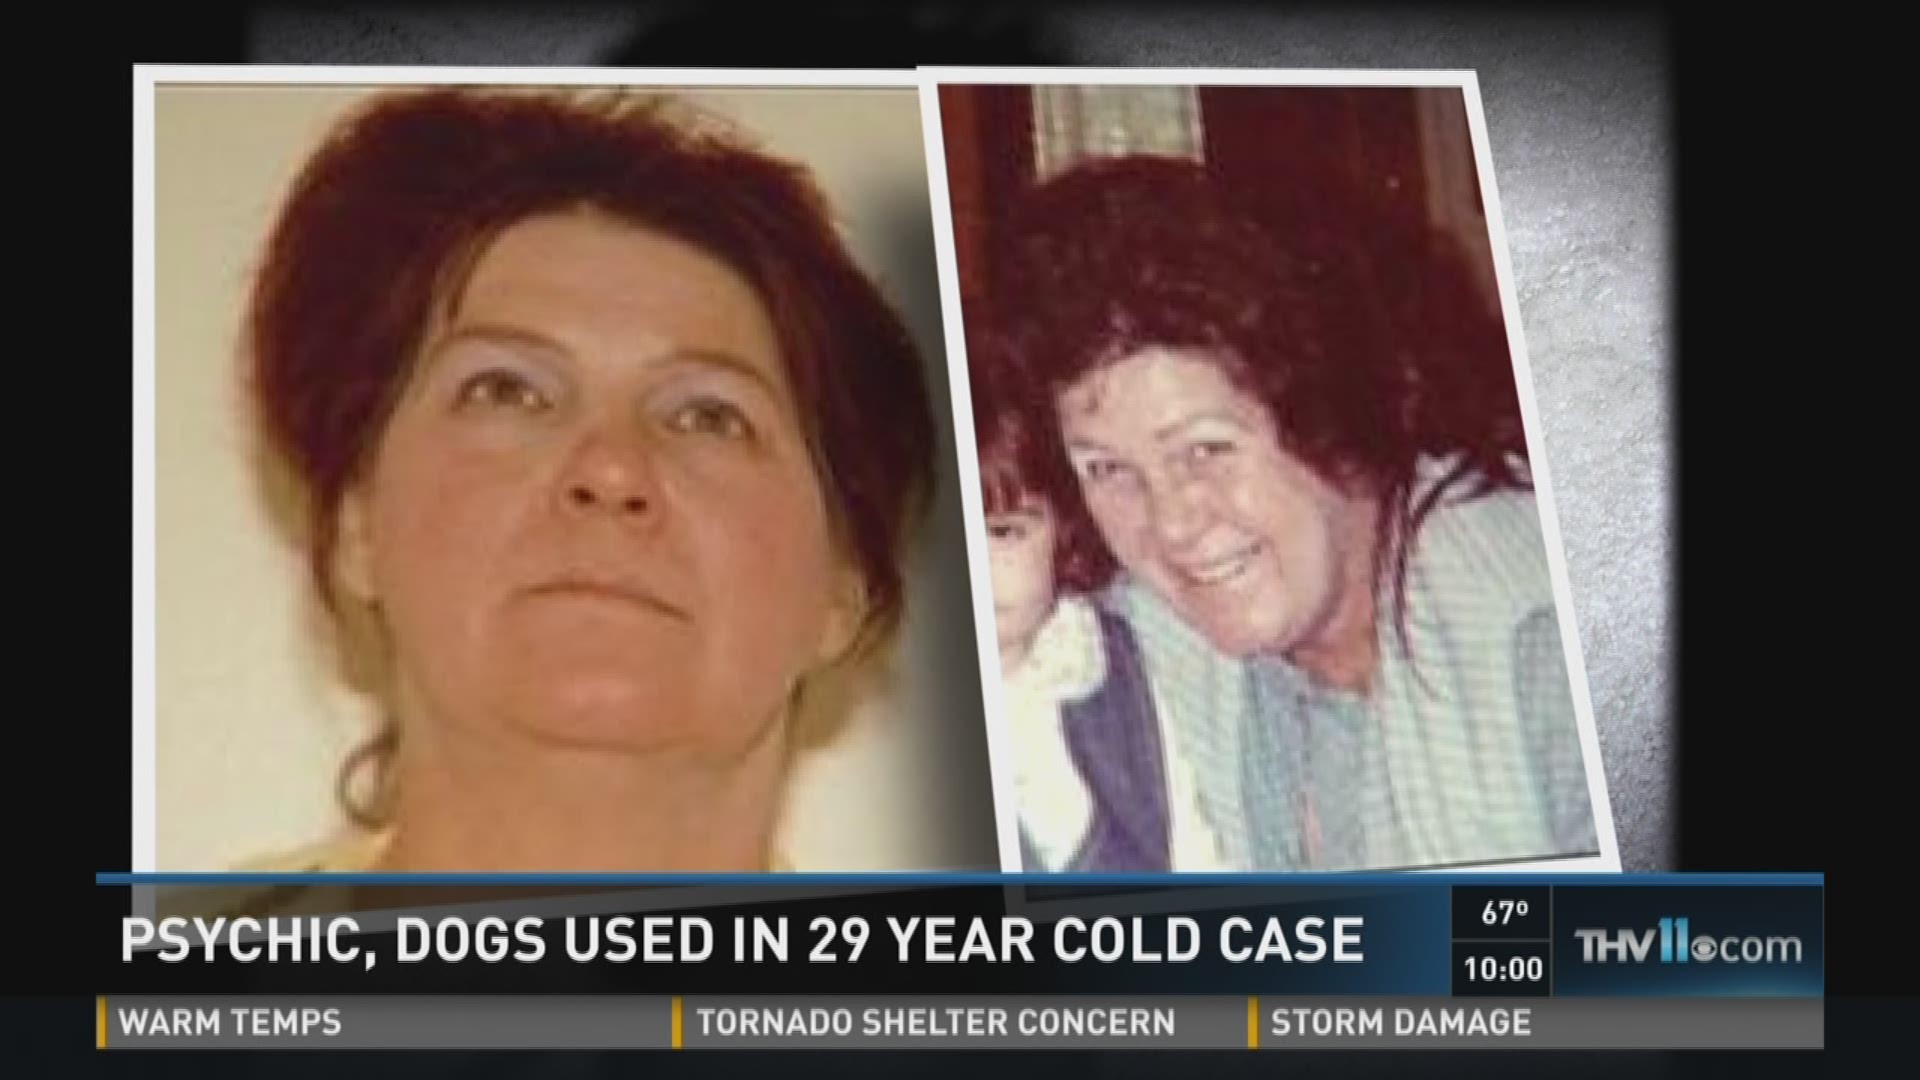 Psychic, dogs used in 29-year-old case